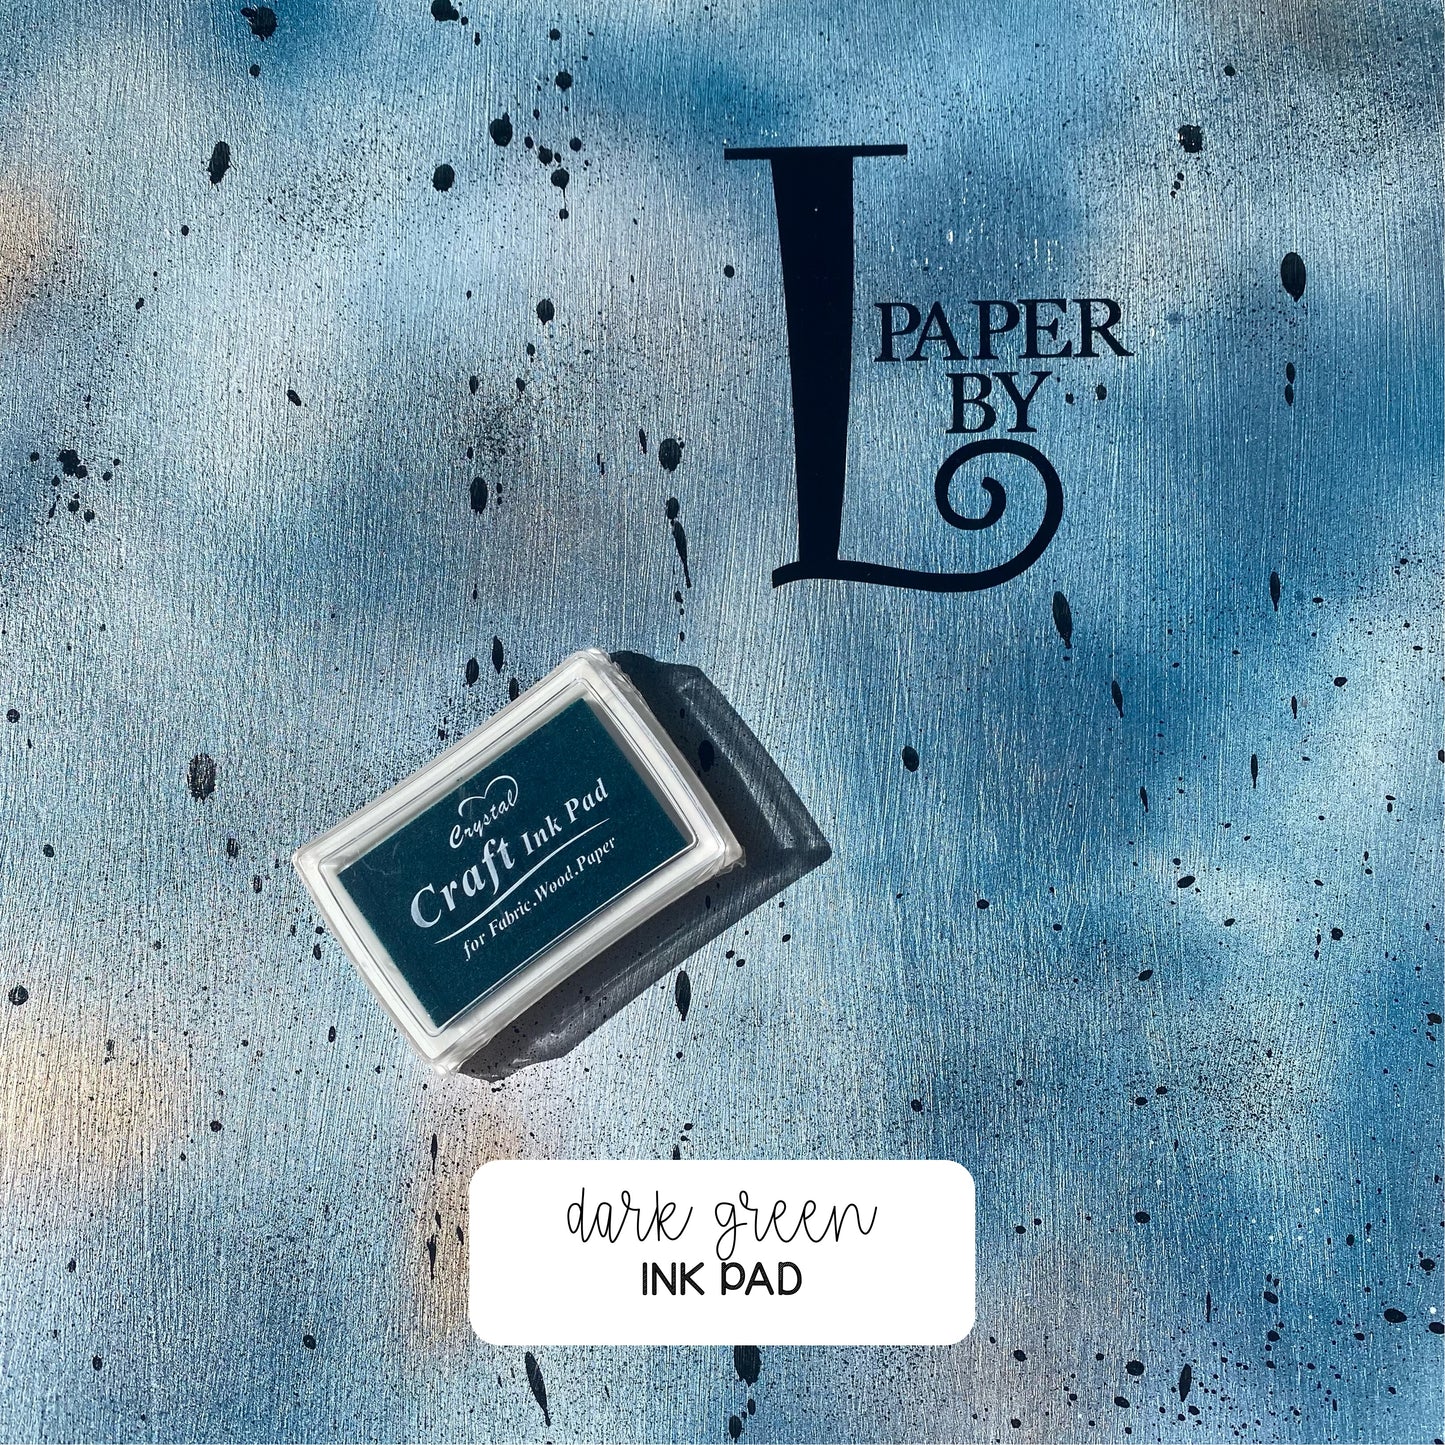 Ink Pad - Paper by L *